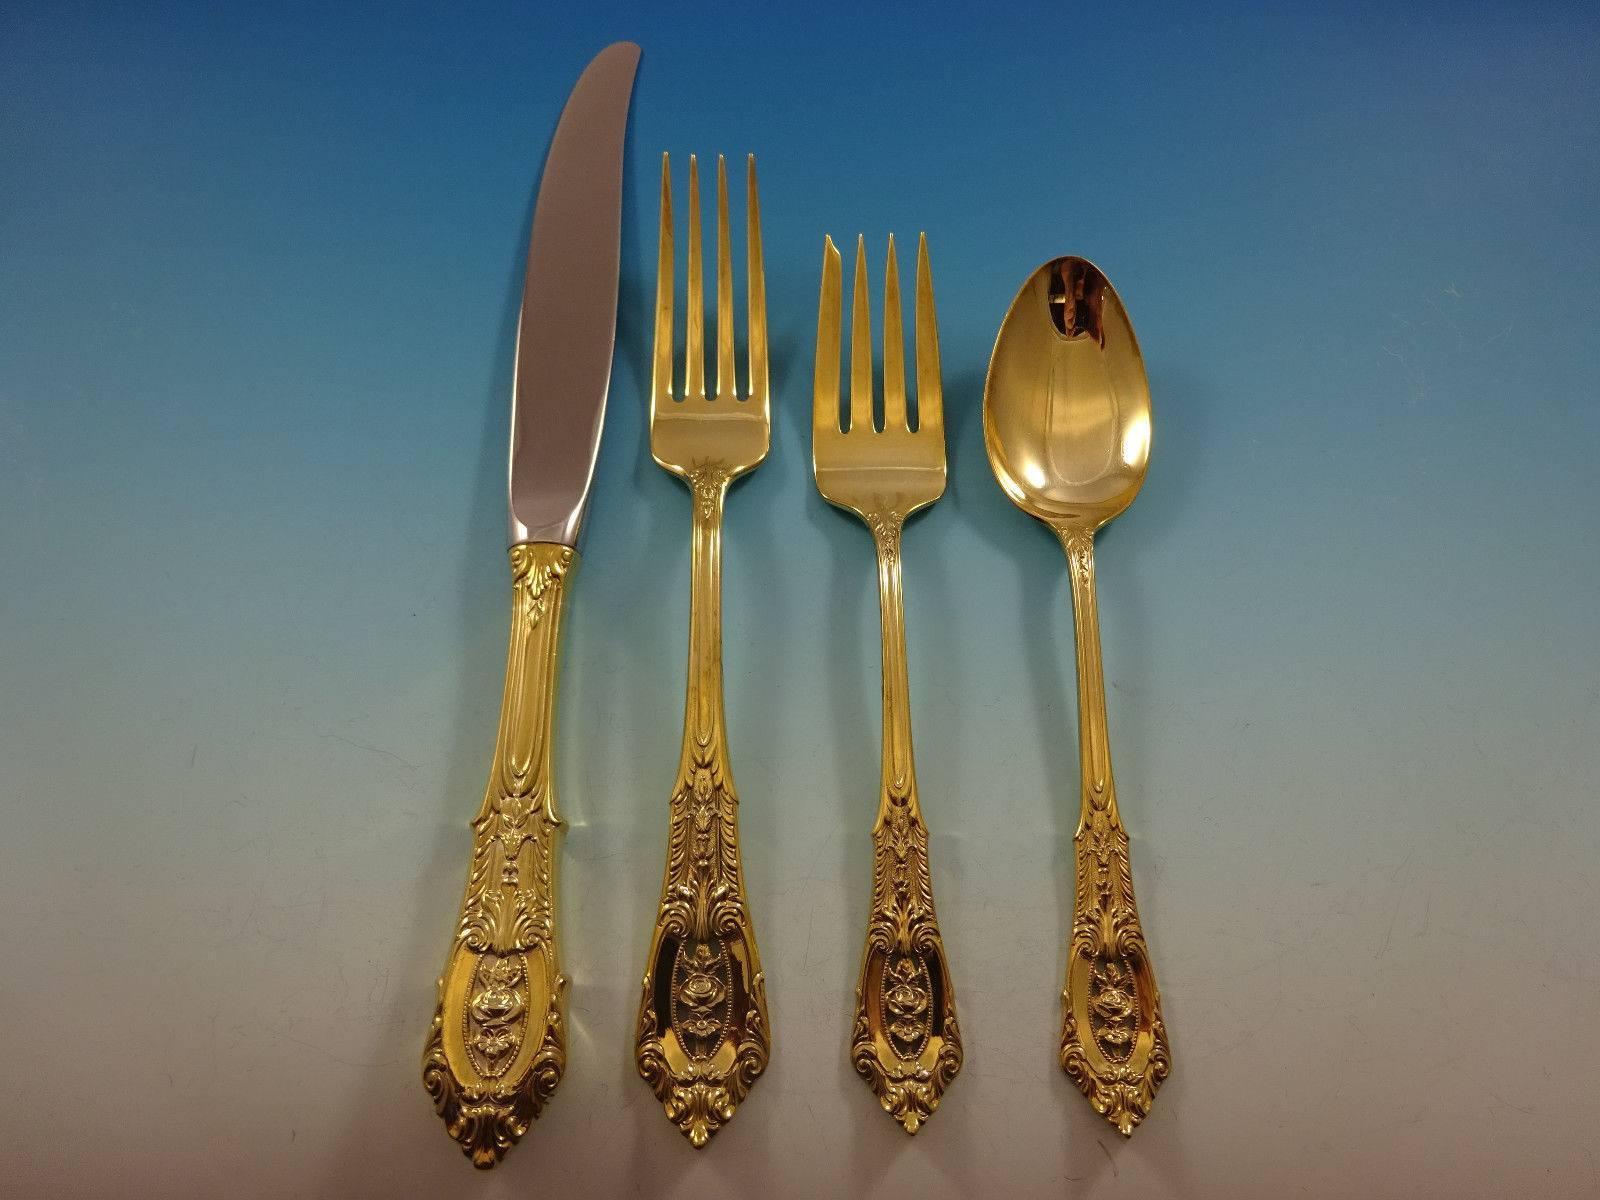 Add some luxe to your life with this fabulous rose point gold by Wallace sterling silver flatware set - 48 pieces. Gold flatware is on trend and makes a bold statement on your table. 

This set is vermeil (completely gold-washed) and includes:
 
12